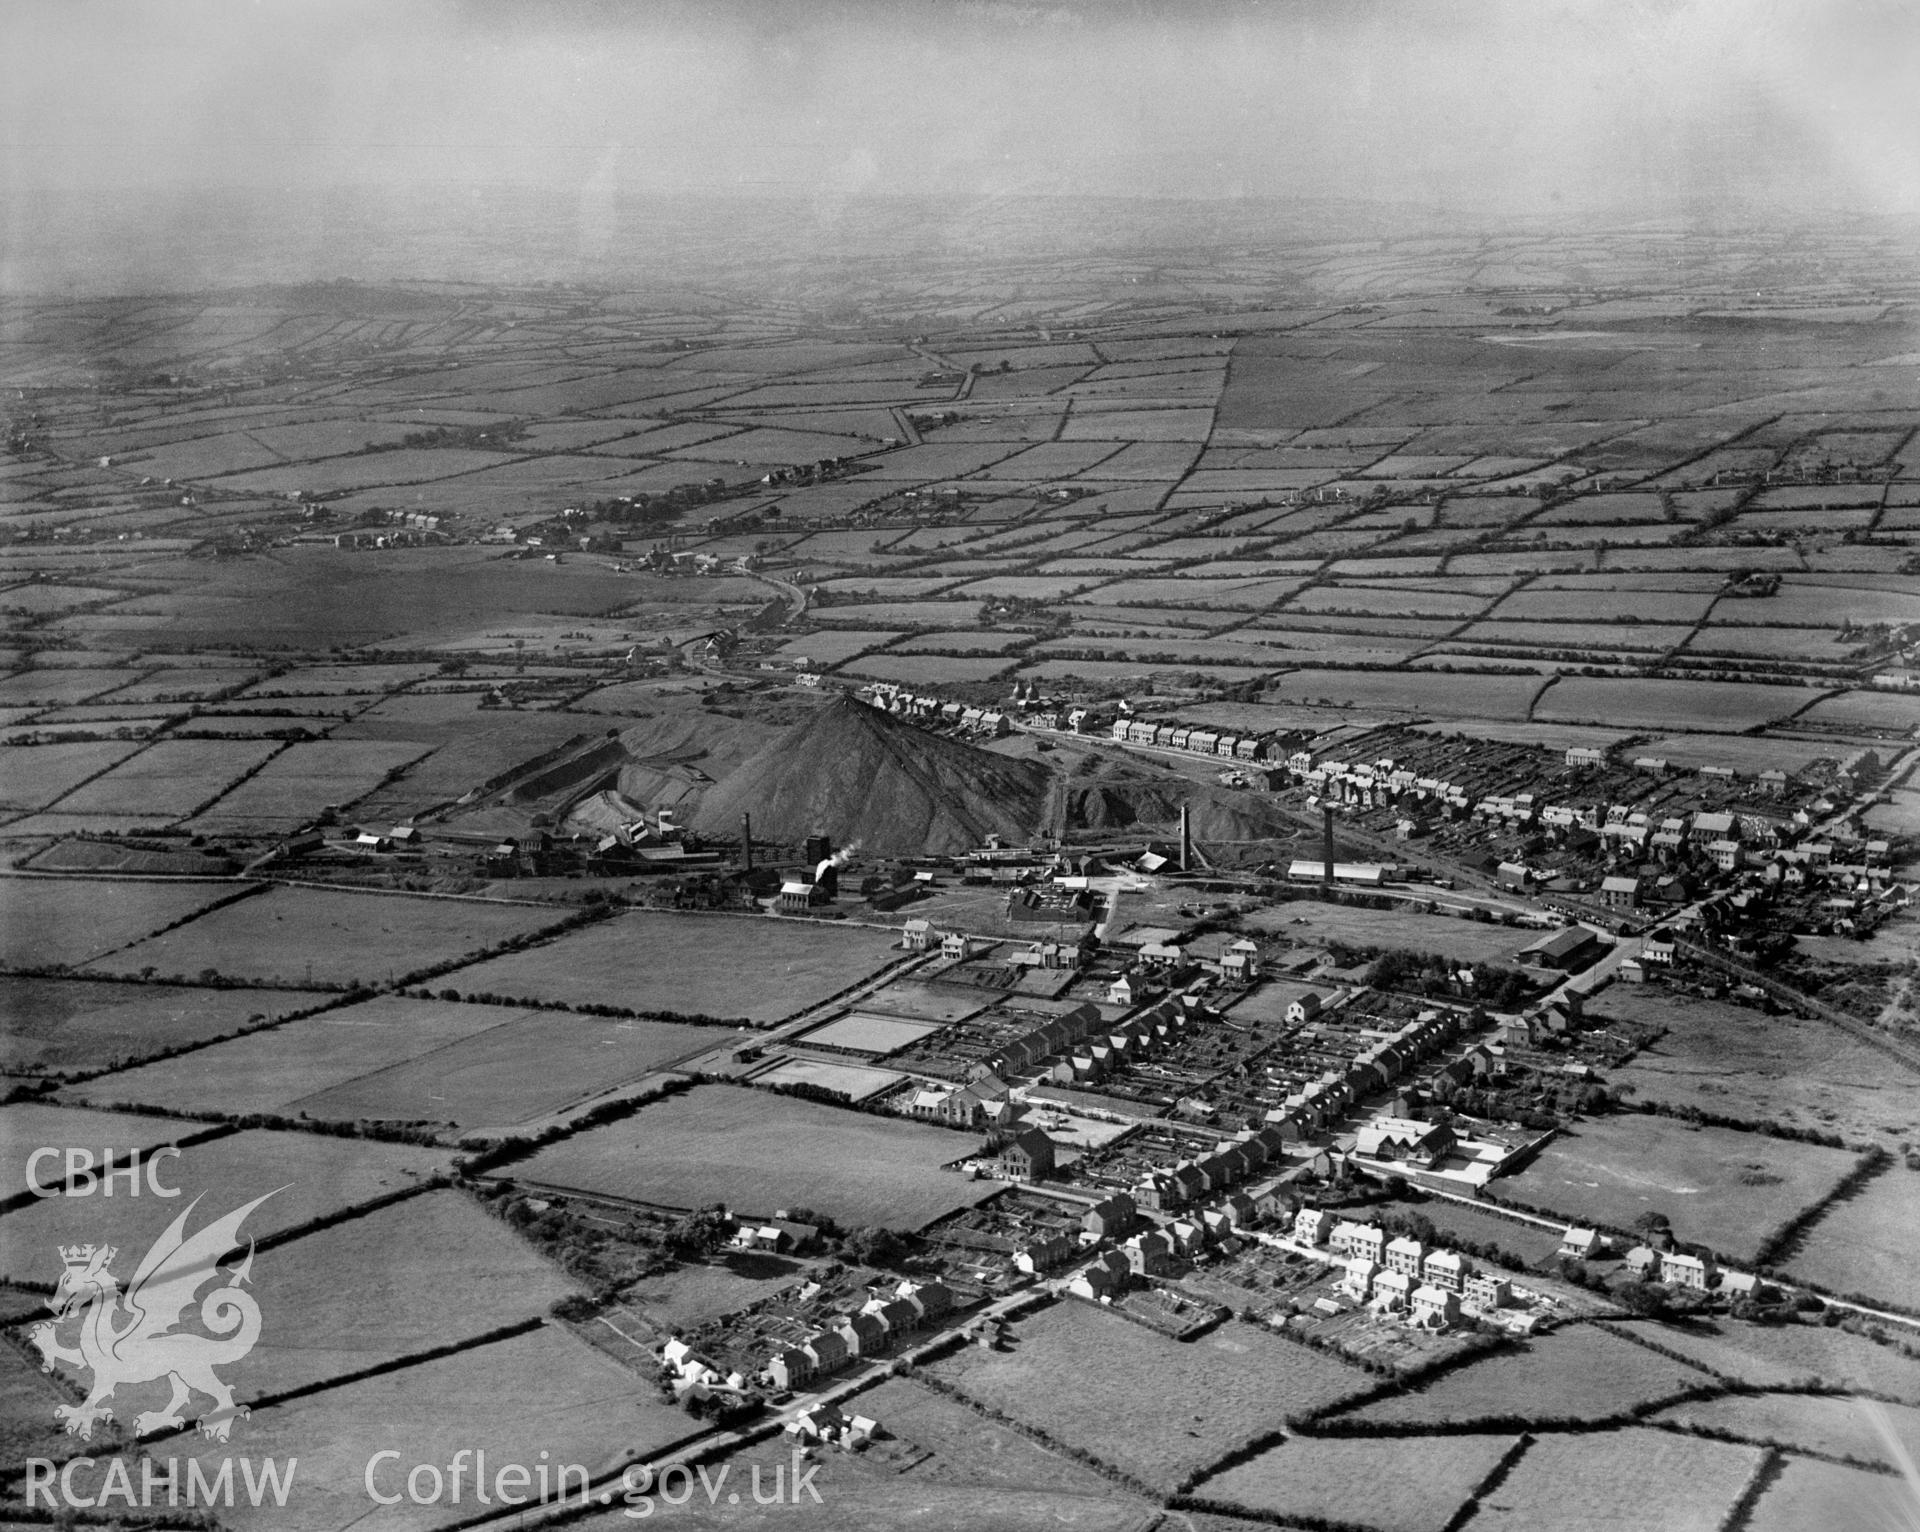 View of the Emlyn Anthracite Colliery, Pen-y-groes. Oblique aerial photograph, 5?x4? BW glass plate.